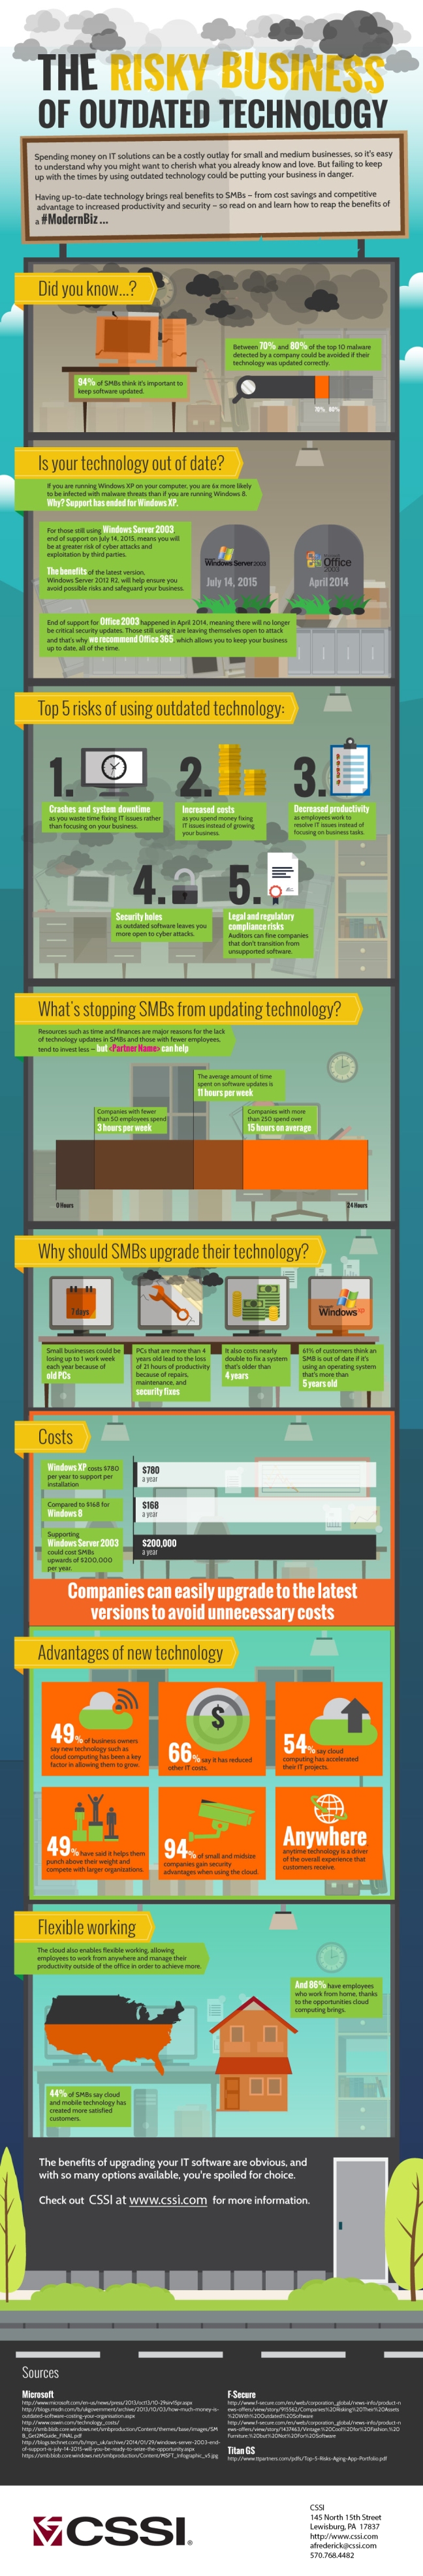 Risky Business Infographic